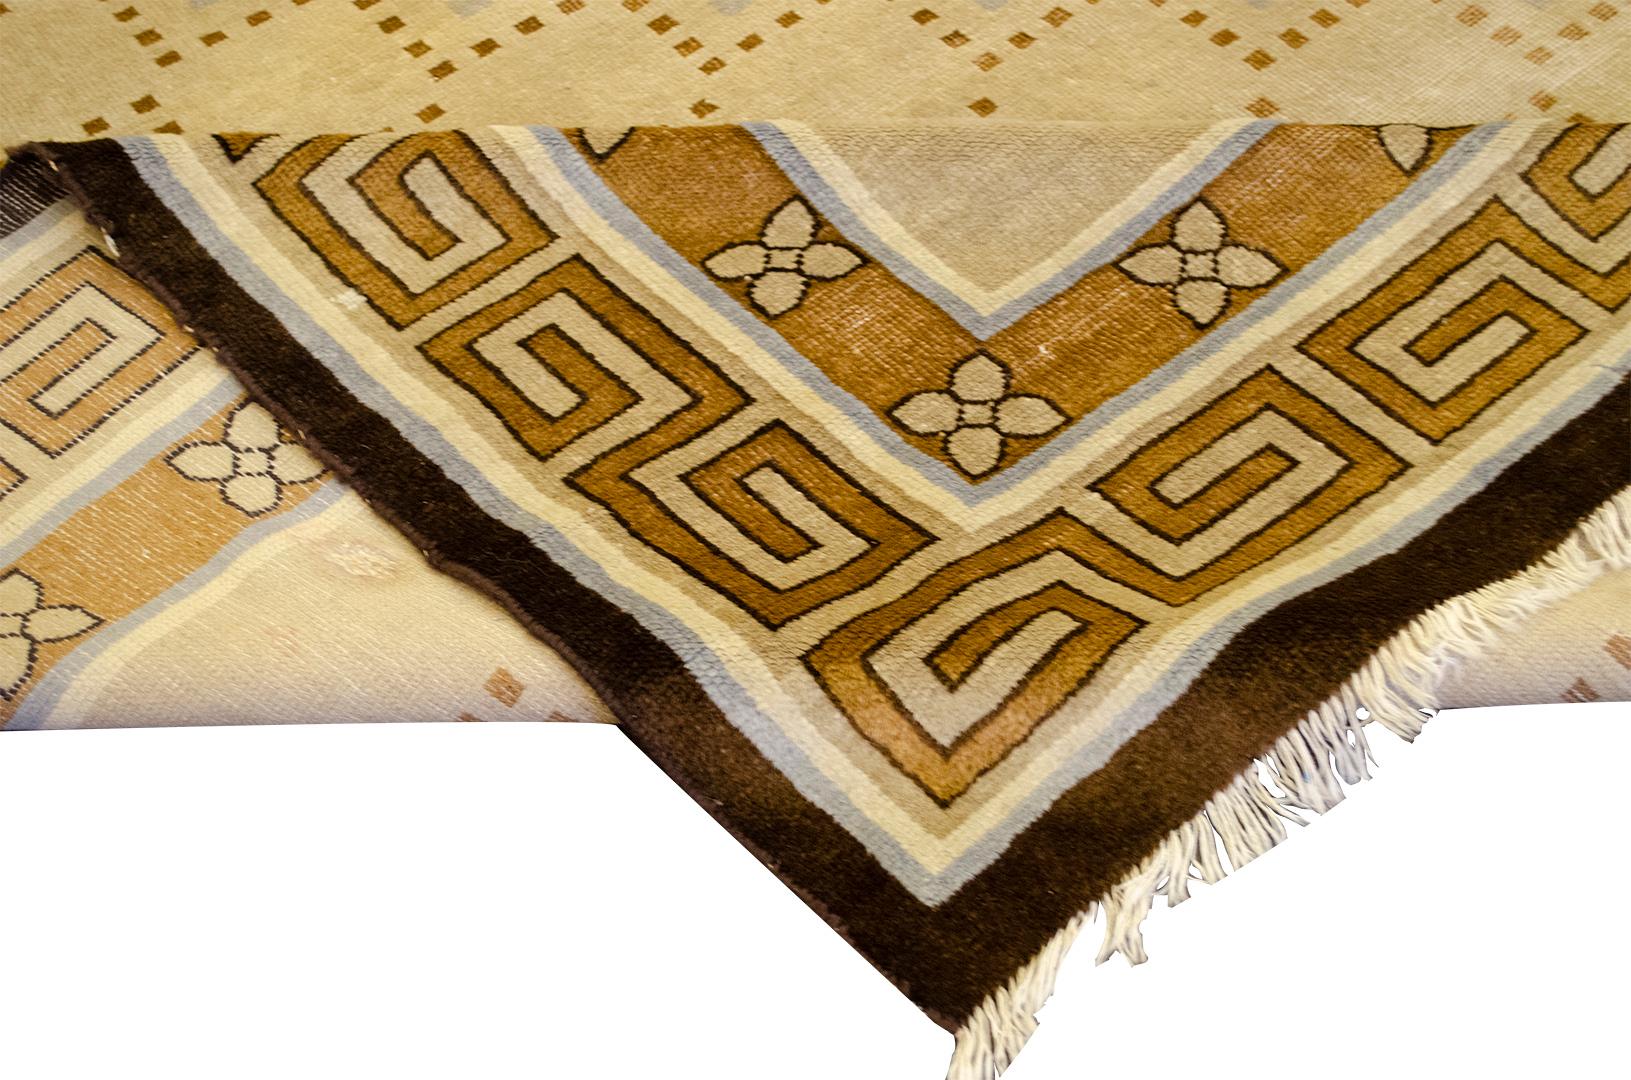 This traditional handwoven Chinese Deco rug has a beige field with dashed mole brown rectangles with periwinkle accents, in a broad traditional Chinese key pattern border, between line stripes.